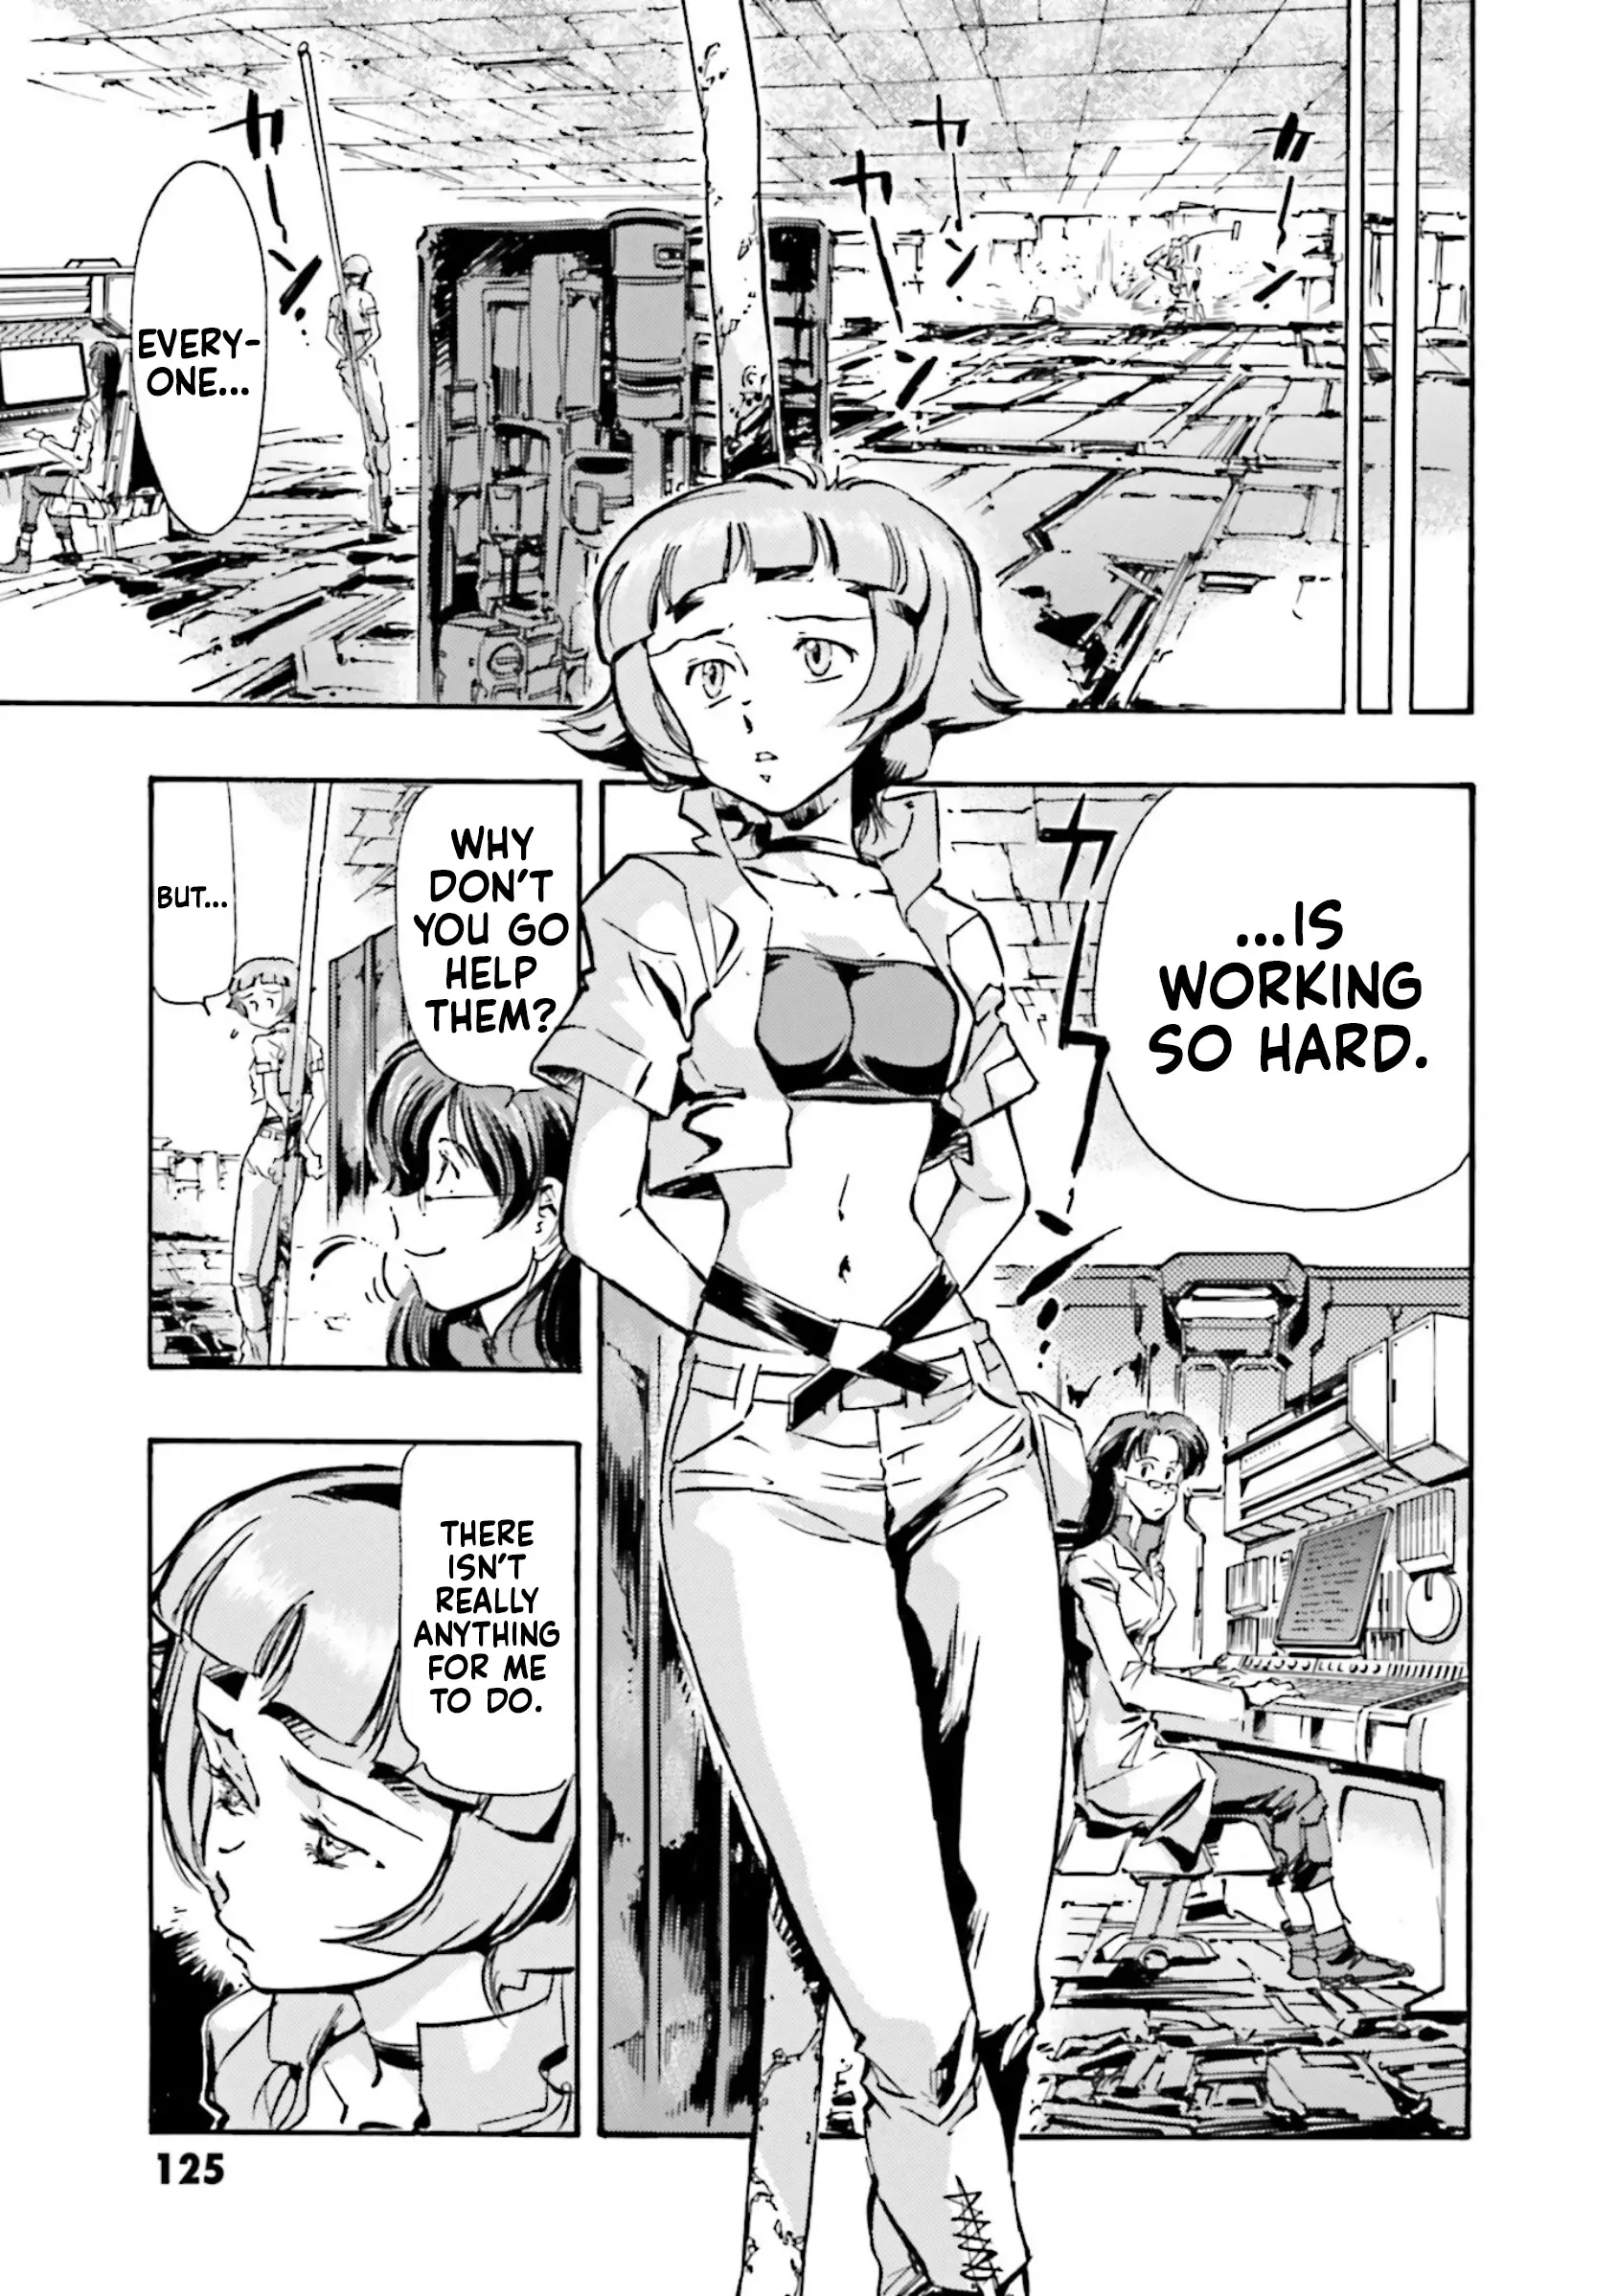 Mobile Suit Gundam Seed Astray R - 3 page 15-9a48c781